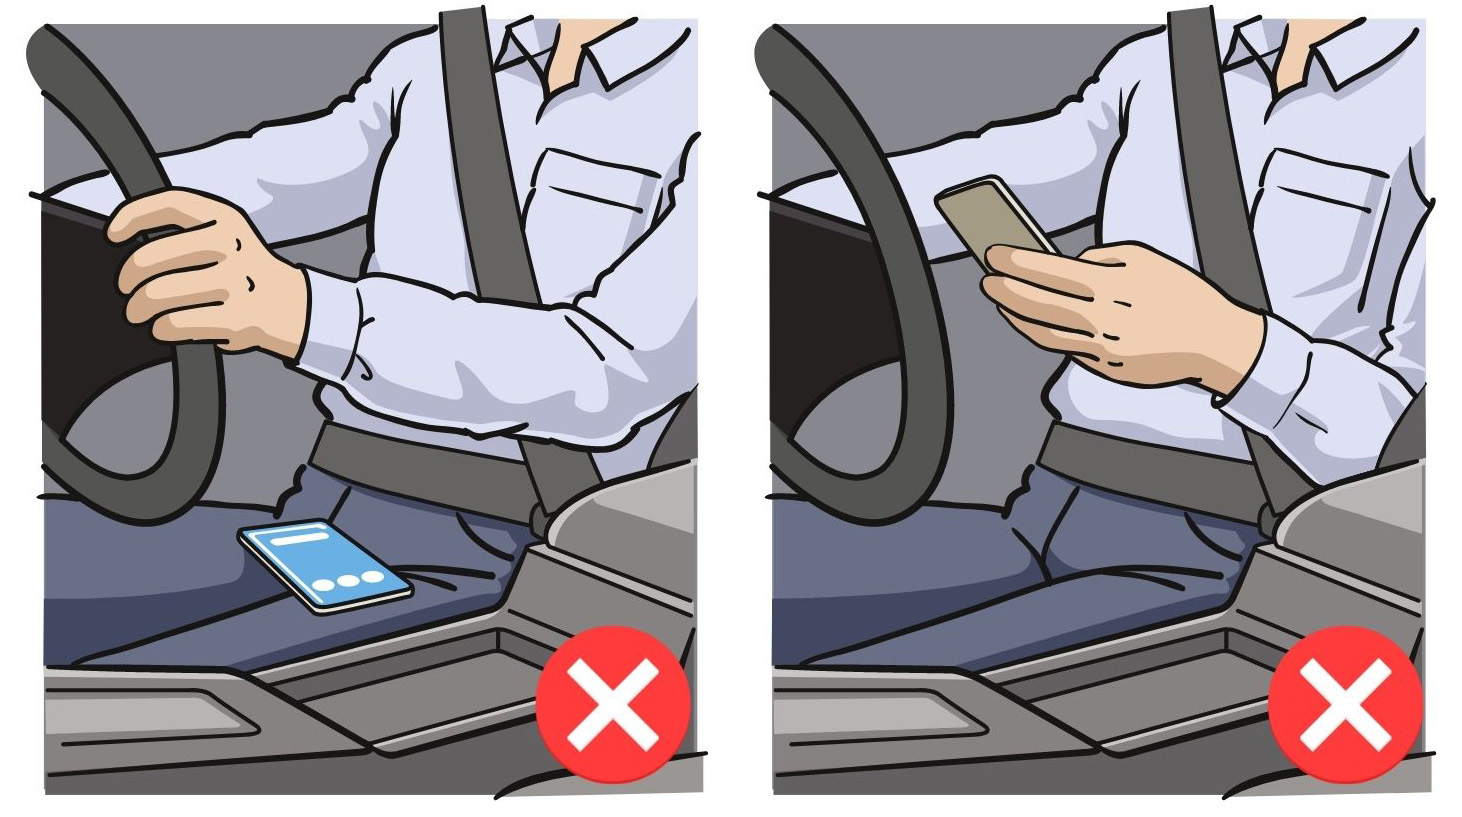 Graphic showing illegal use of mobile phone when driving, phone on lap and phone in hand.